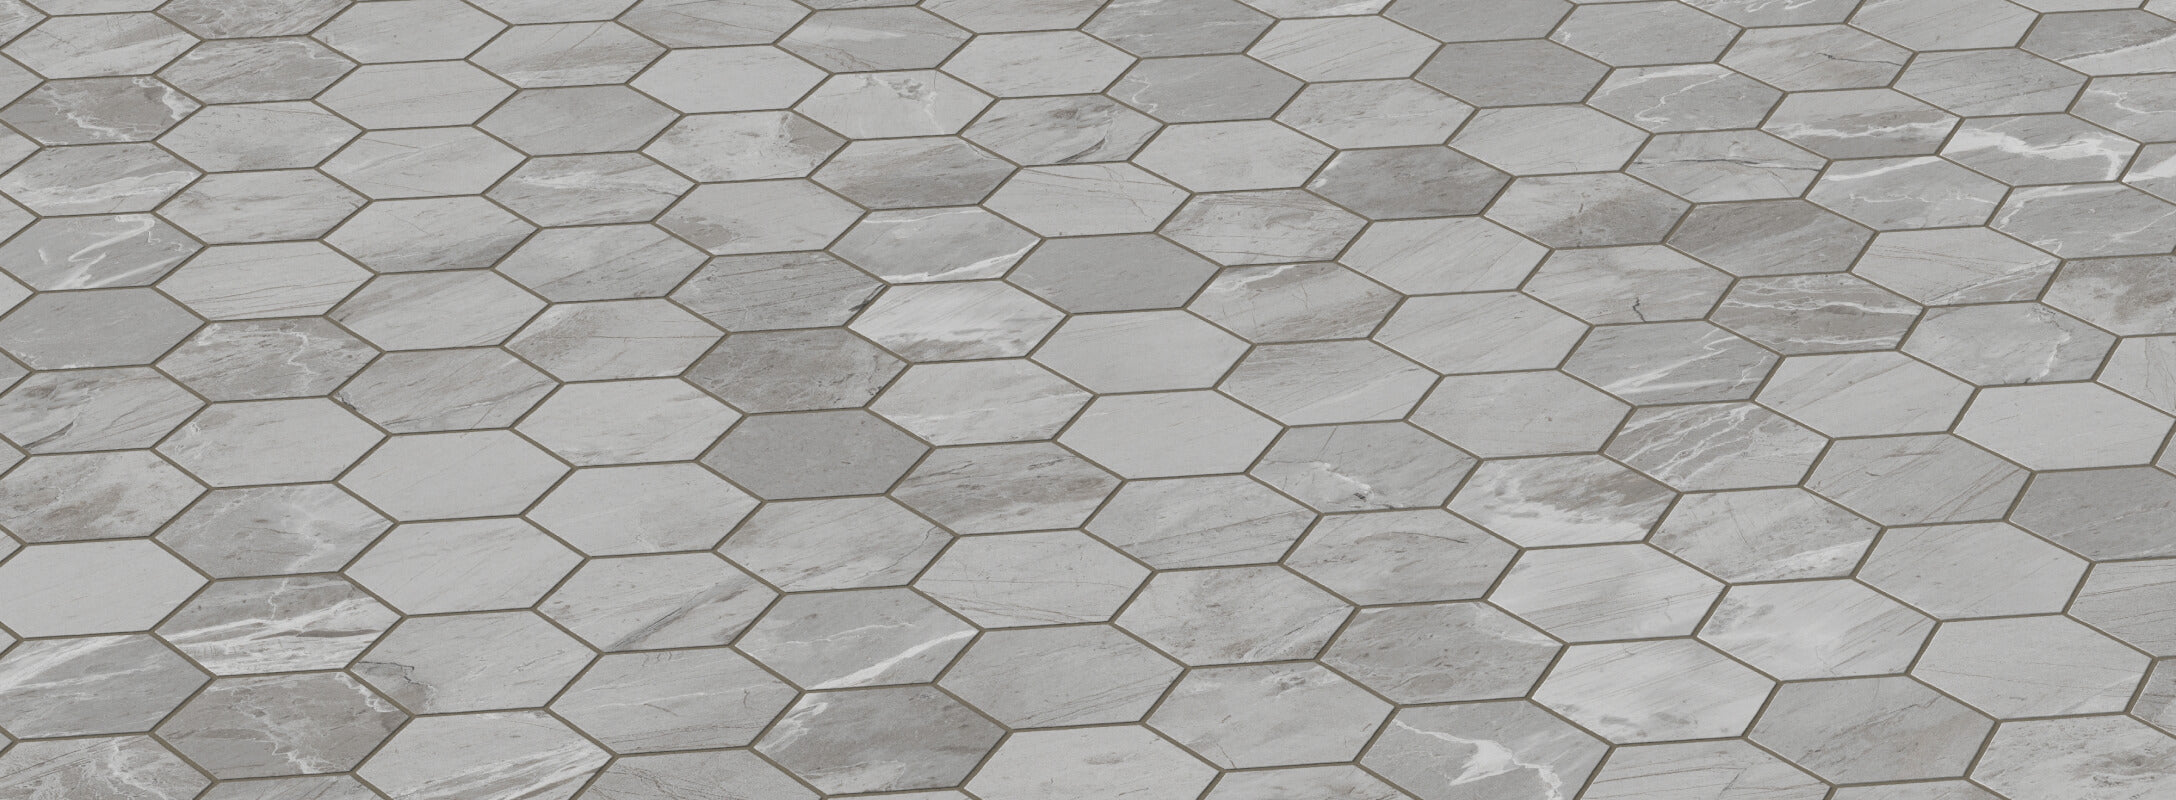 Elegant grey hexagonal mosaic tiles, adding a touch of refined sophistication to any floor